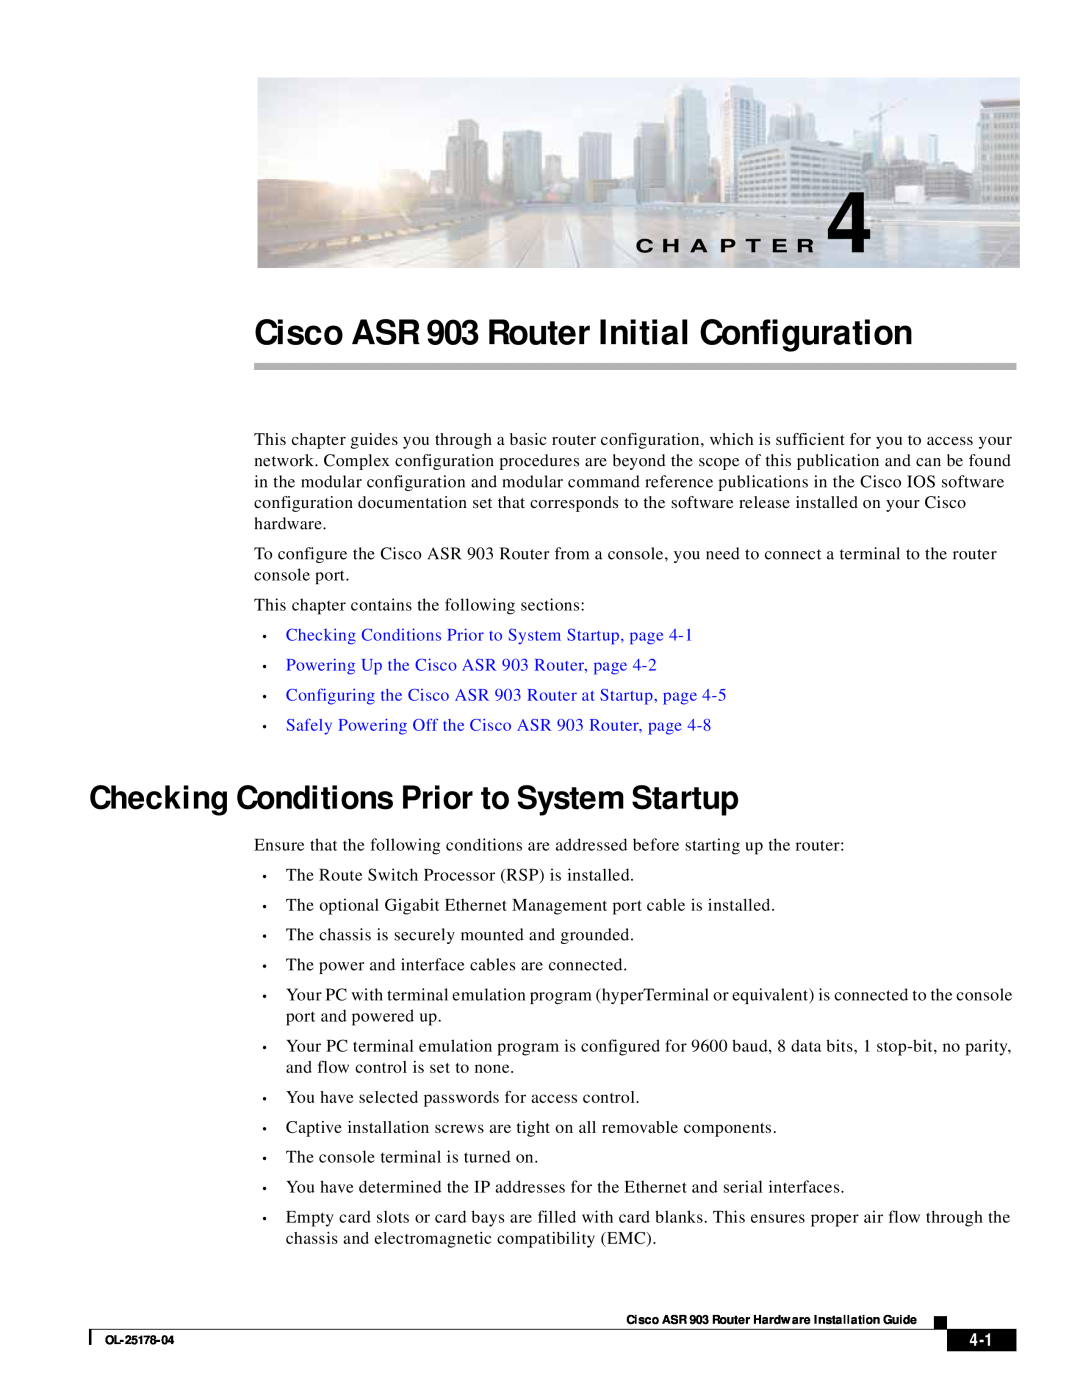 Cisco Systems Cisco ASR 903 Router Initial Configuration, Checking Conditions Prior to System Startup, C H A P T E R 